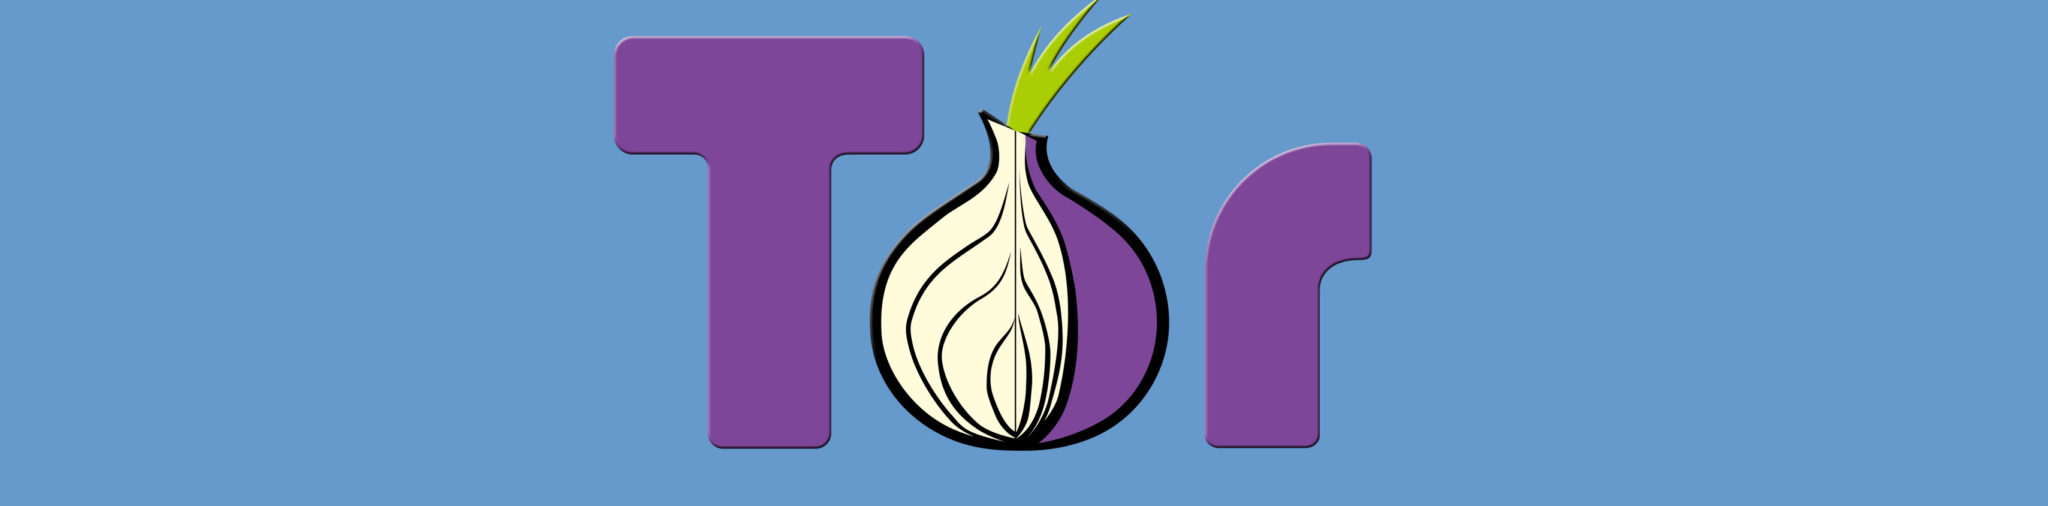 tor onion browser online